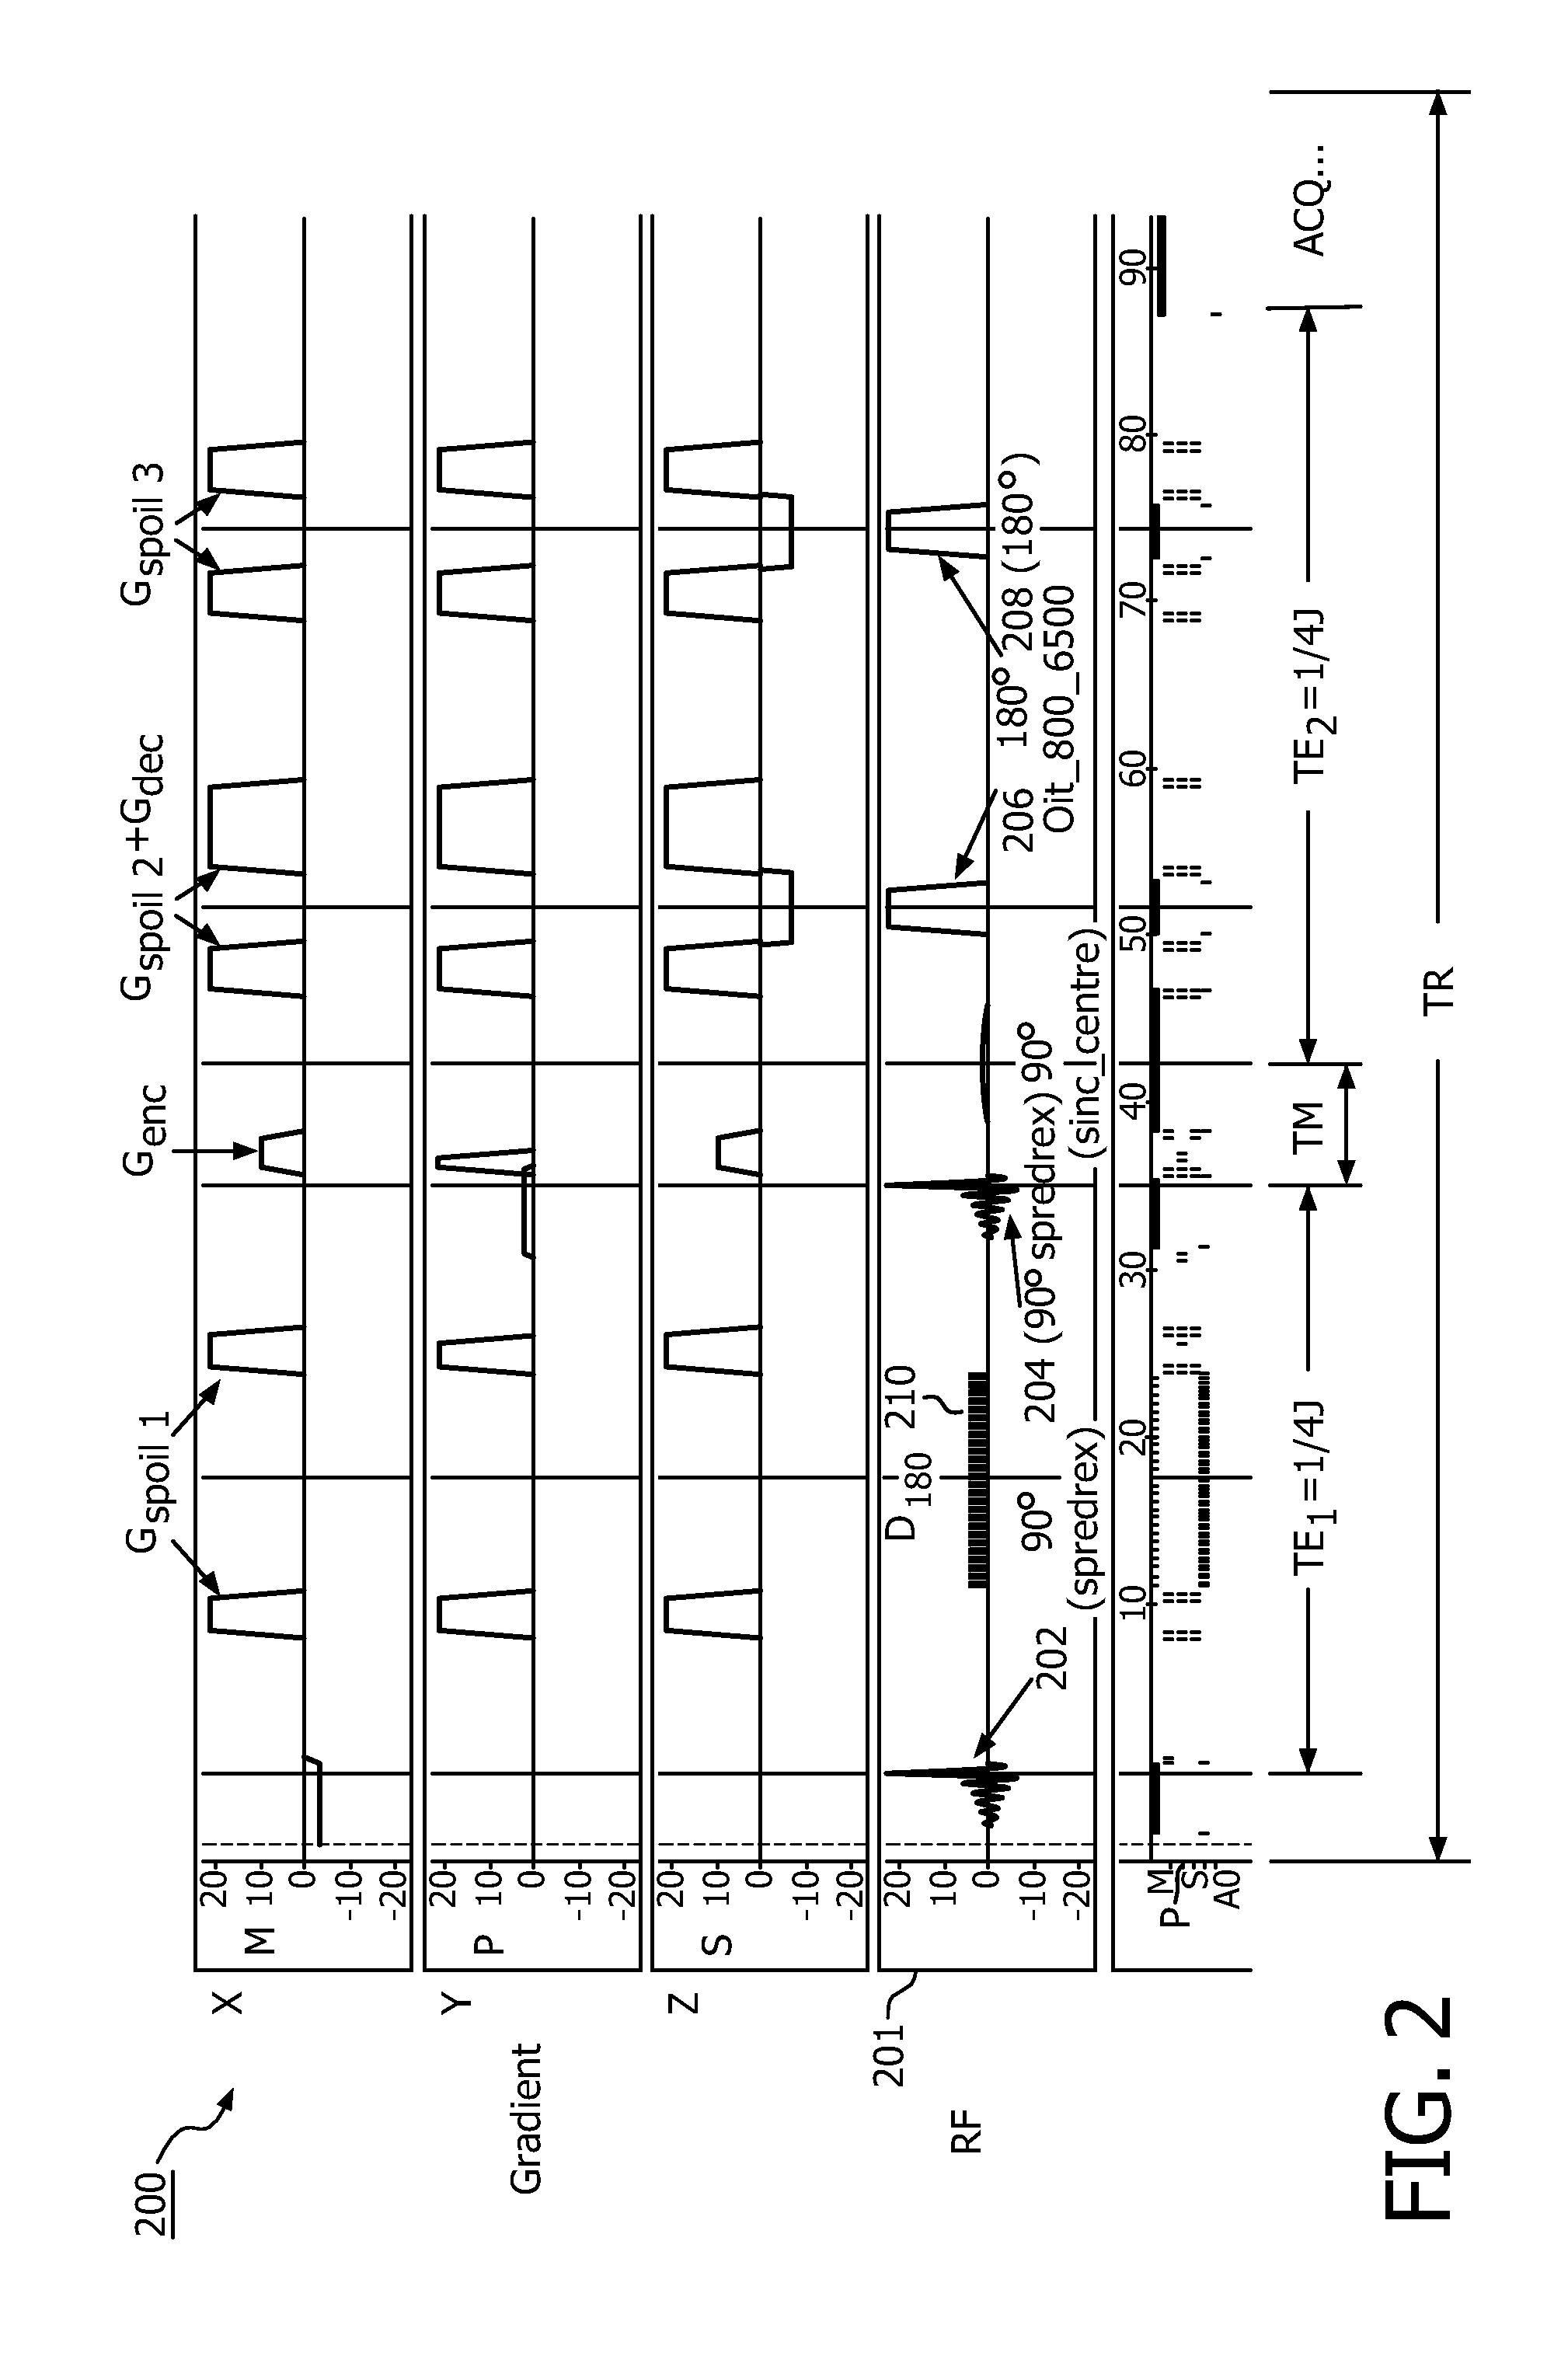 Metabolite detection system and operation thereof